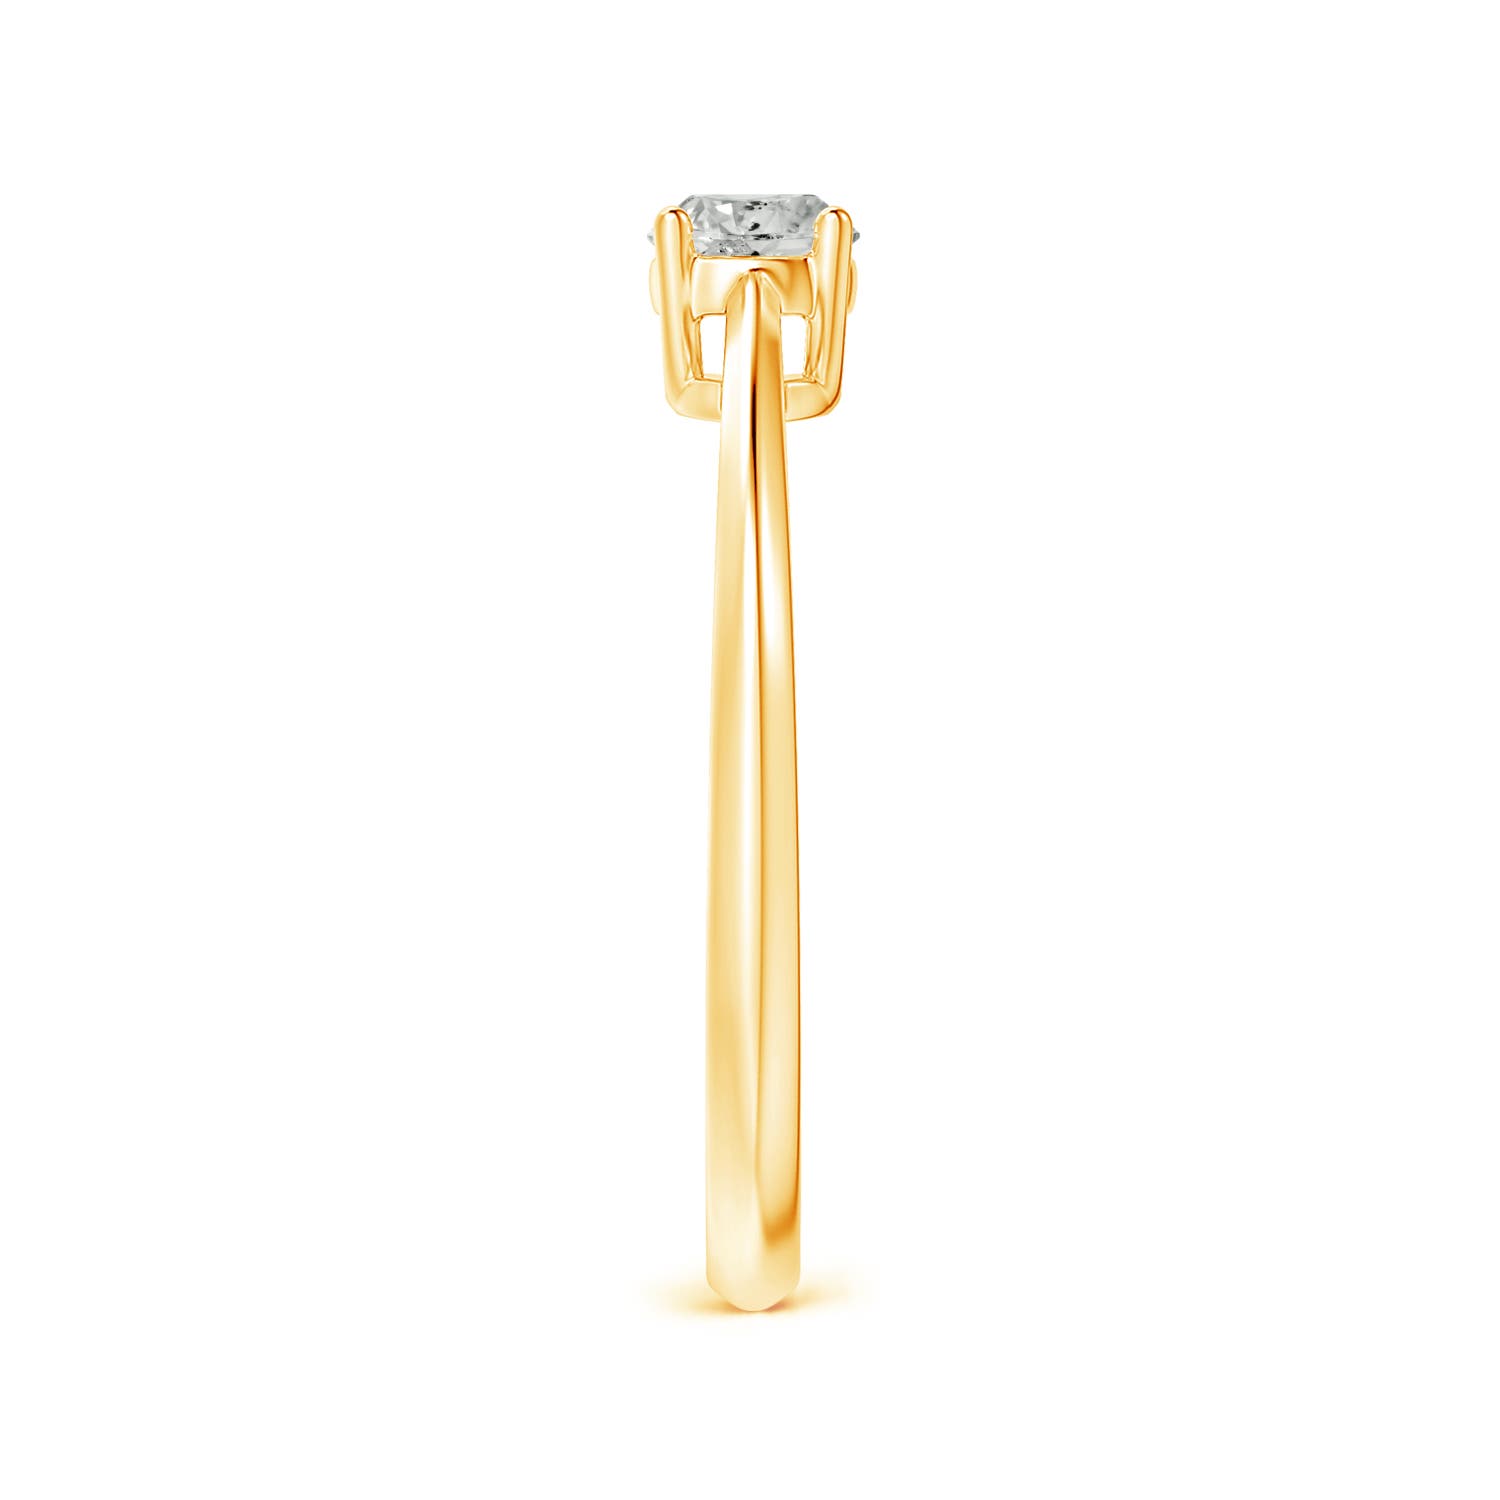 K, I3 / 0.33 CT / 14 KT Yellow Gold